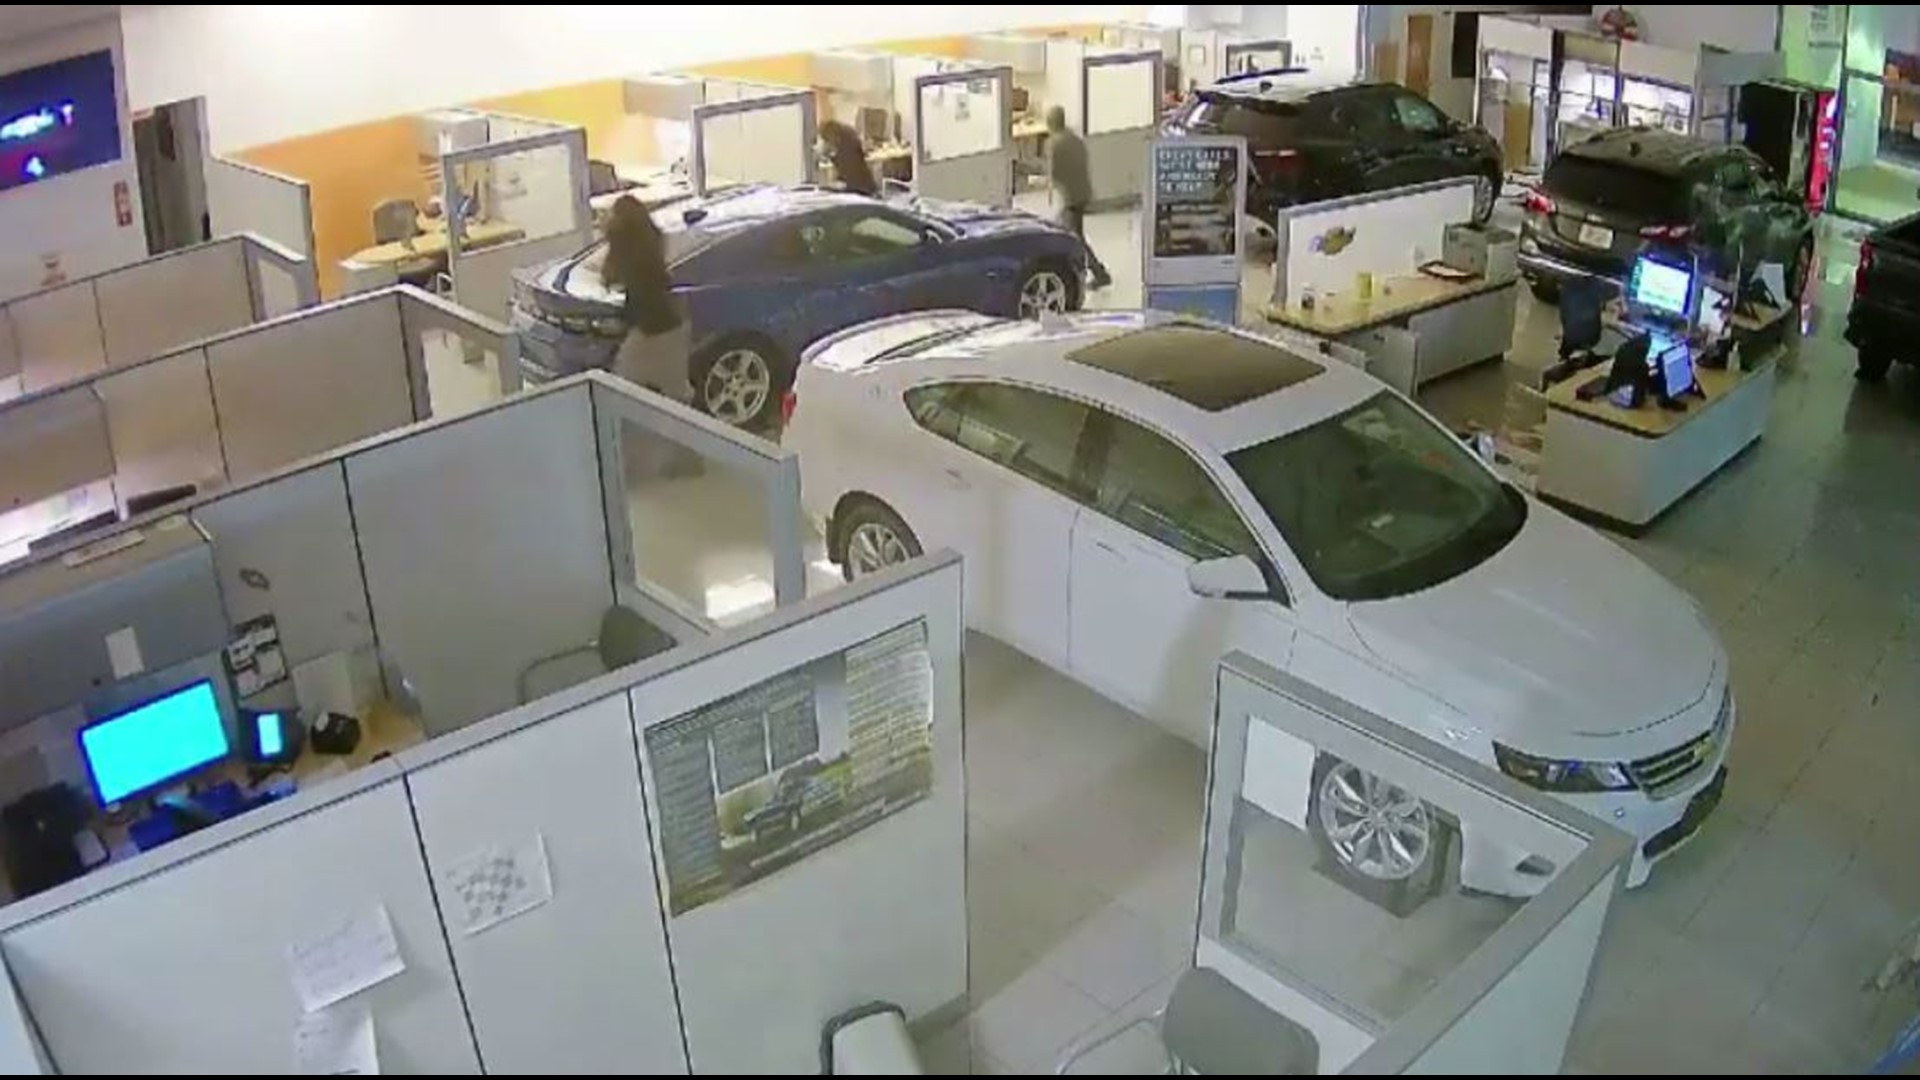 Police are asking for help identifying the suspects who stole three cars from Don Brown Chevrolet on June 2.